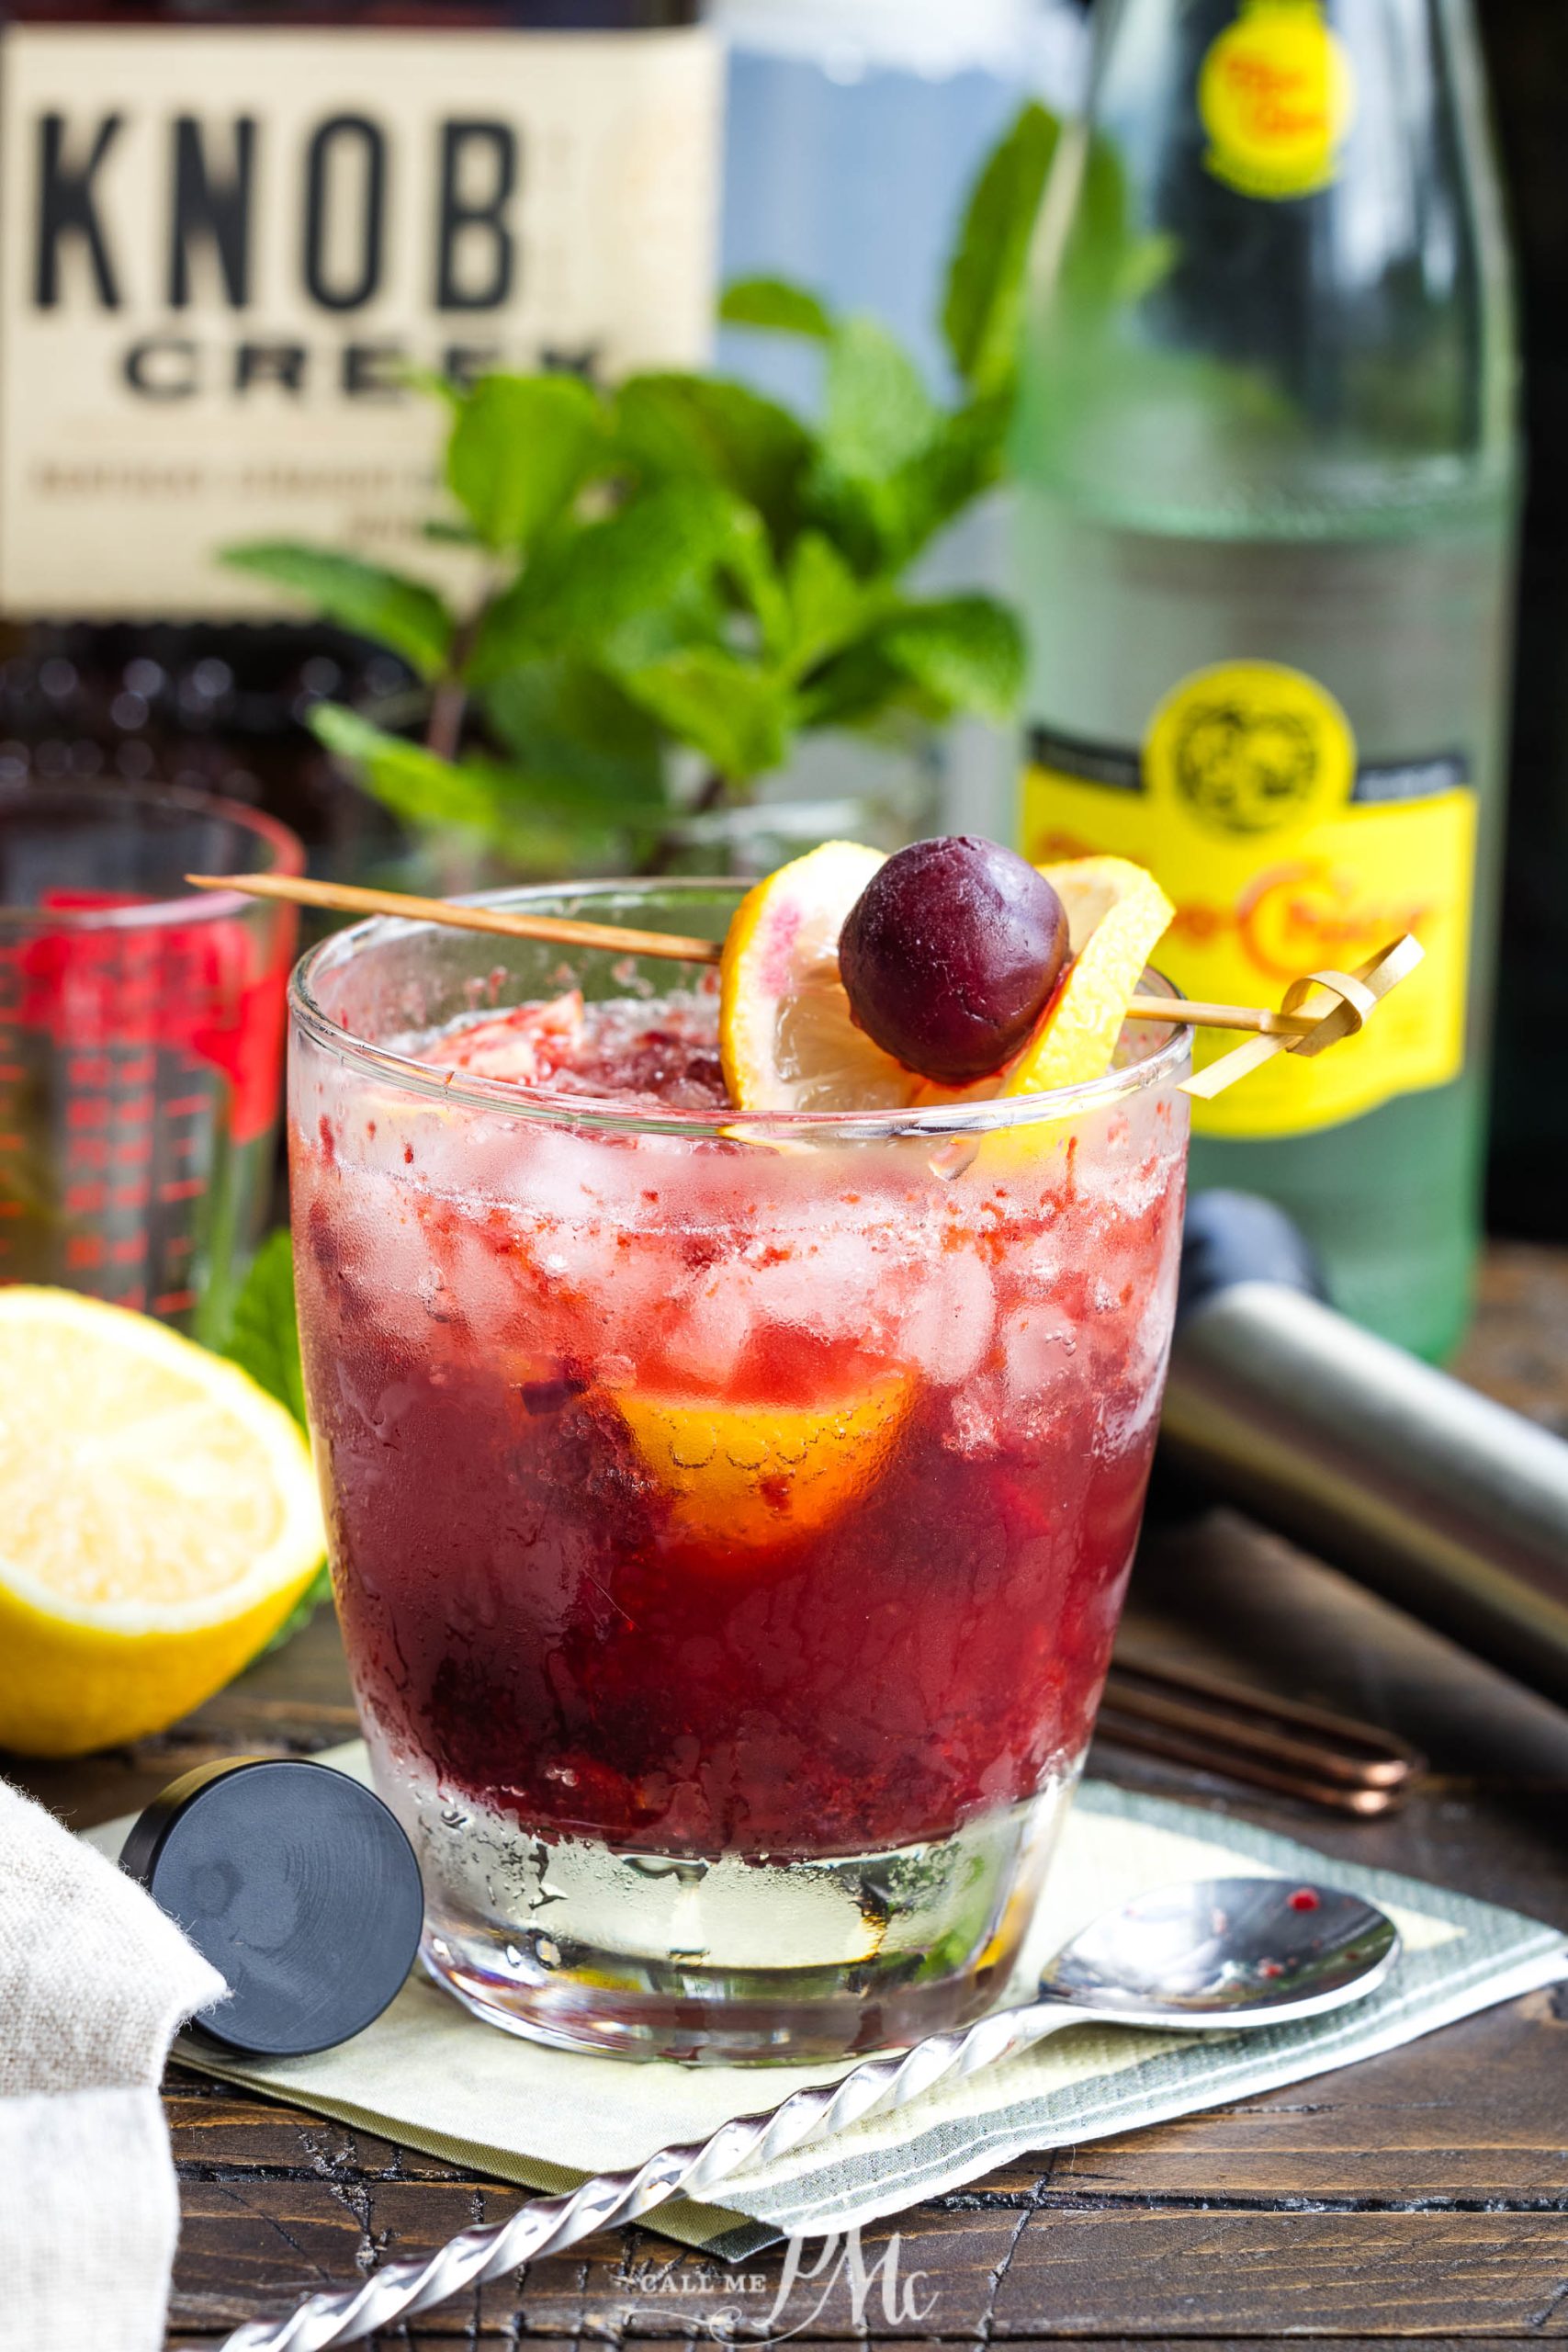 A refreshing cocktail with crushed ice, lemon slices, and a cherry, garnished with mint, served on a wooden table next to a bottle of tonic water and spirits.